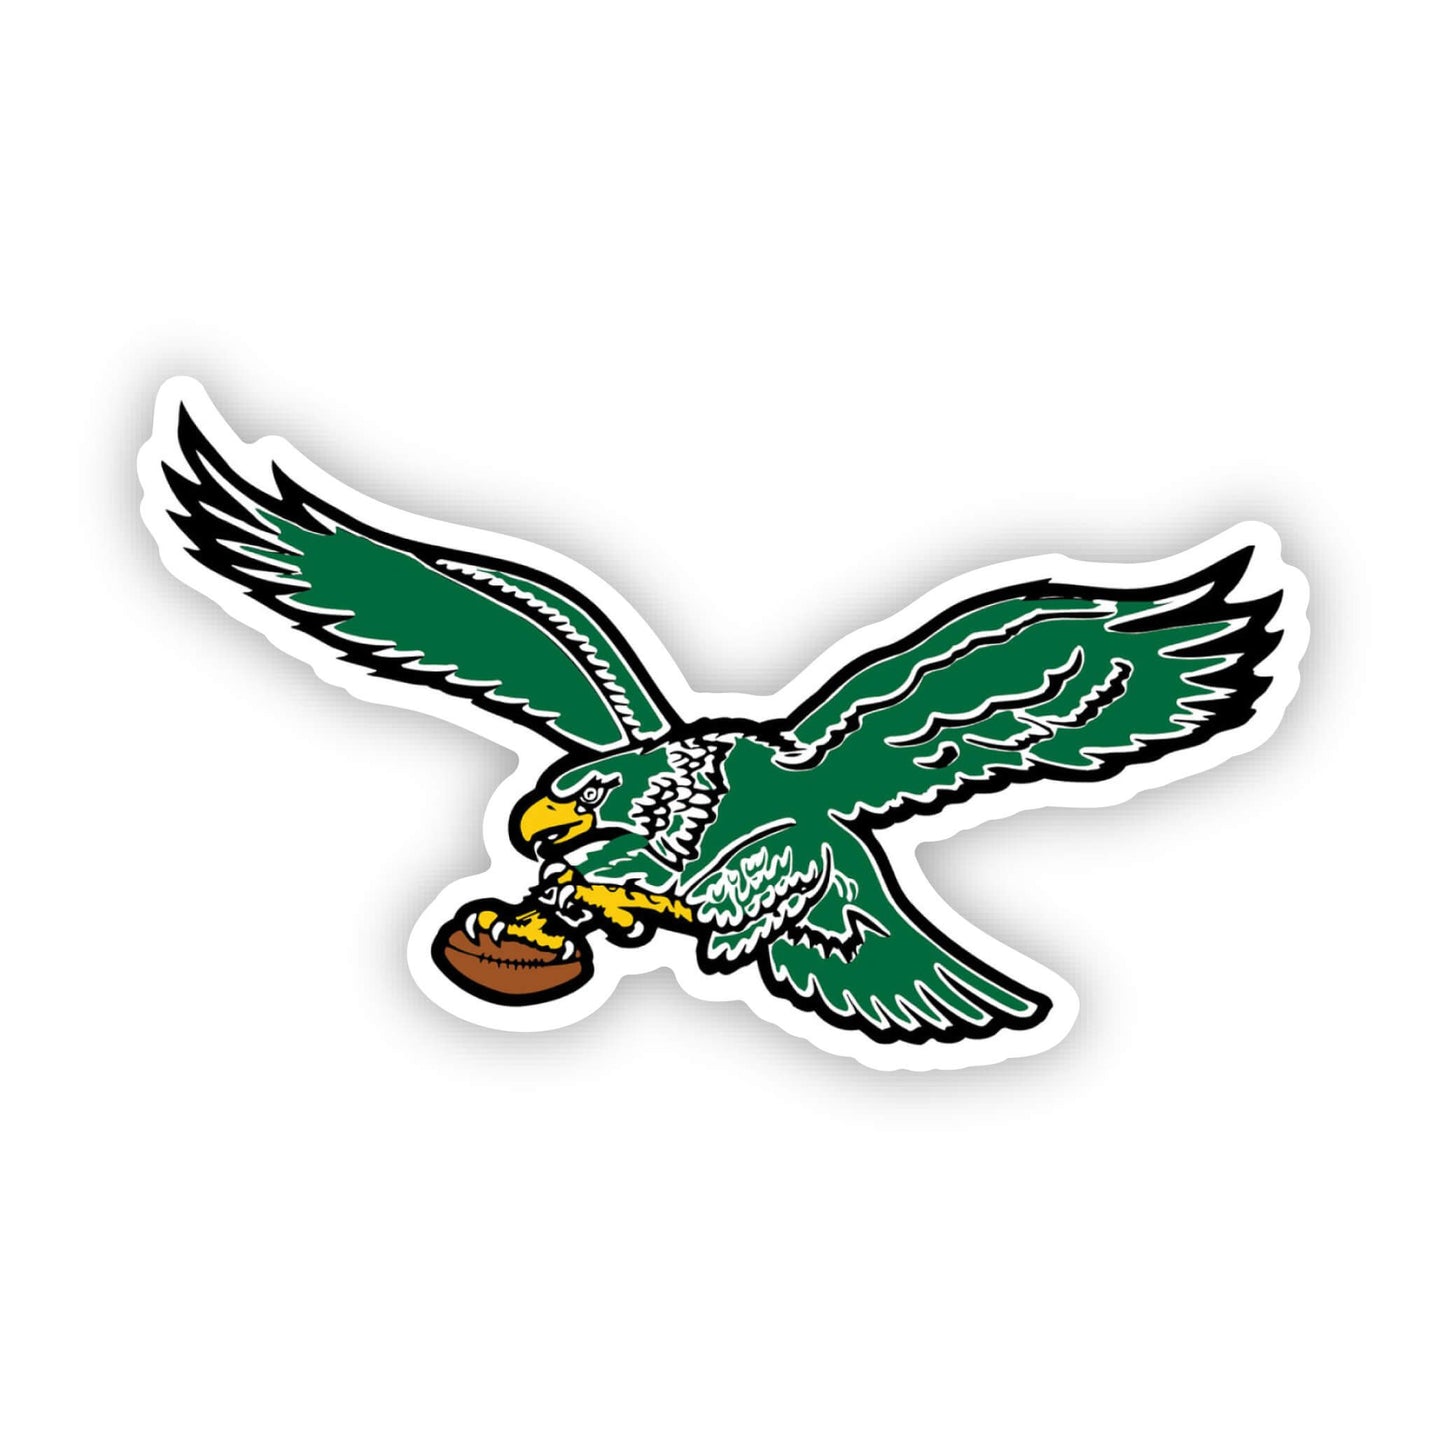 Fly Eagles Fly Sticker